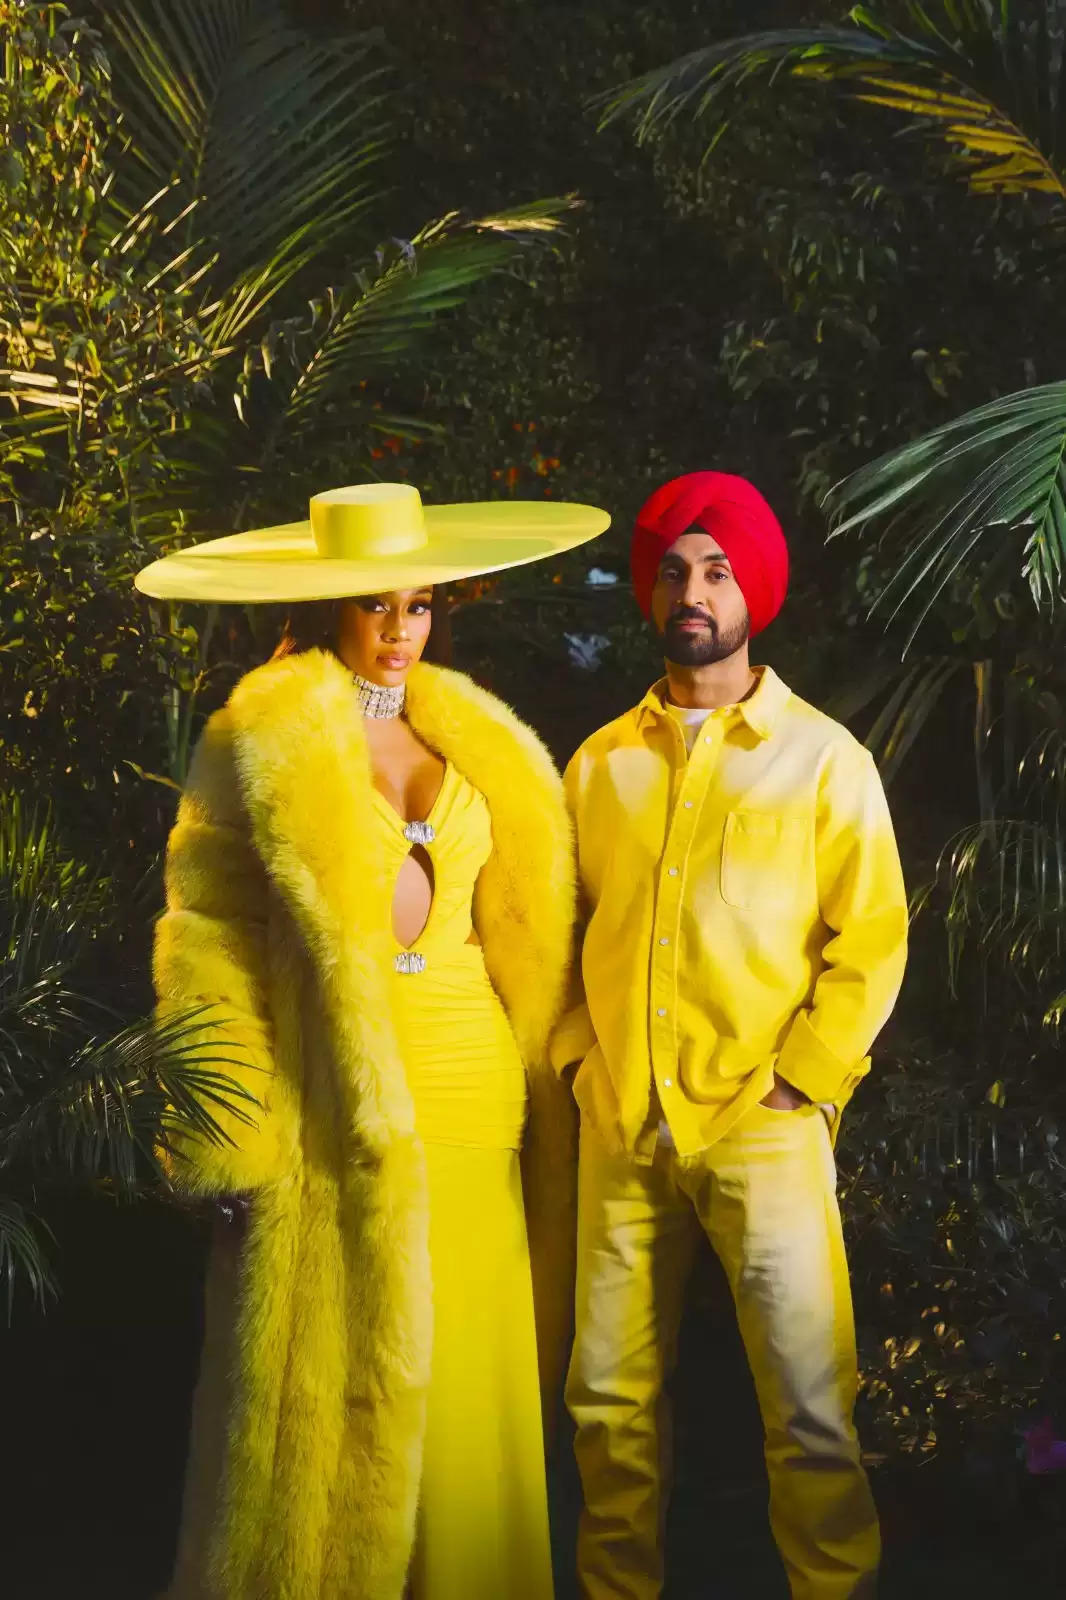 Icon Diljit Dosanjh Teams Up with International Sensation Saweetie for a Summer Smash Hit 'Khutti'